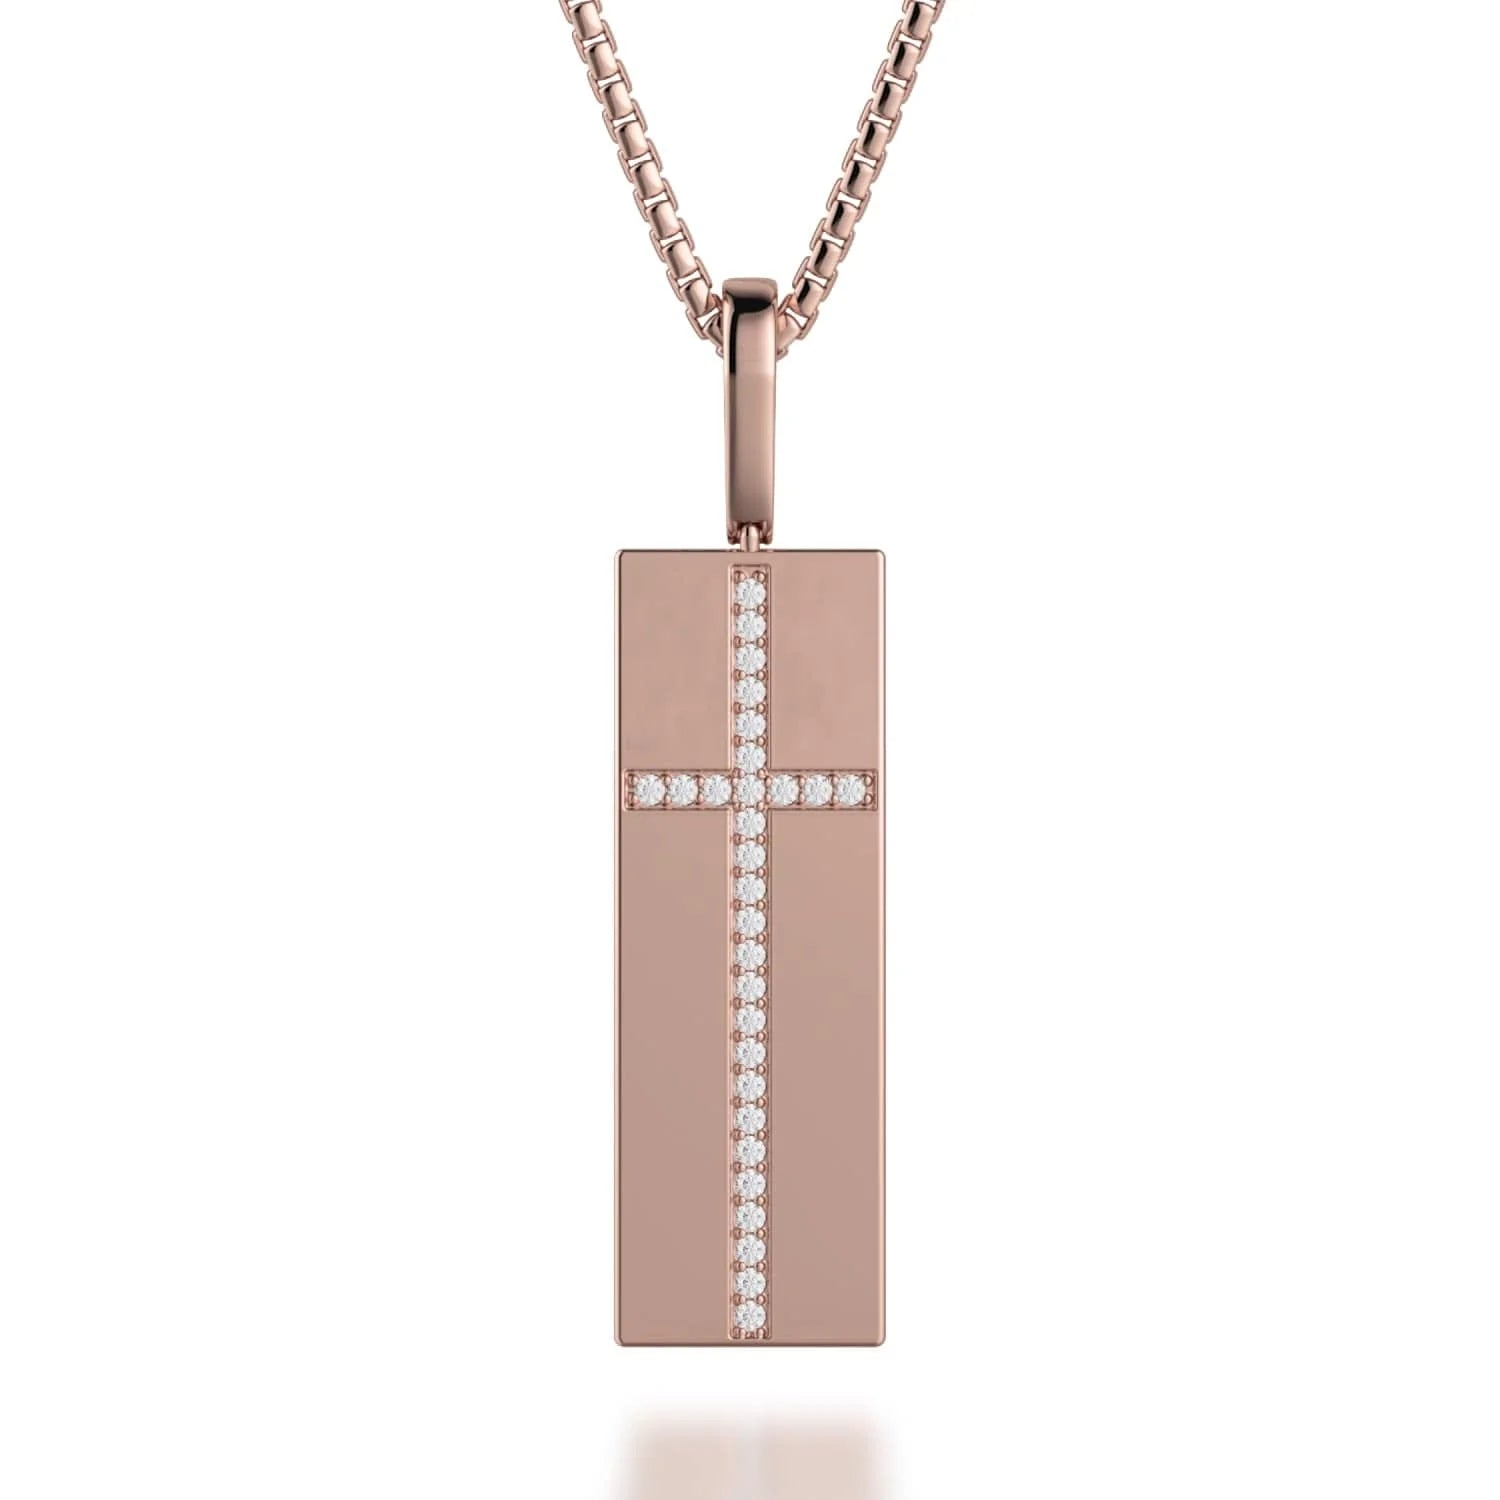 MICHAEL M Necklaces 14K Rose Gold Diamond Cross Tag Necklace MP233RG